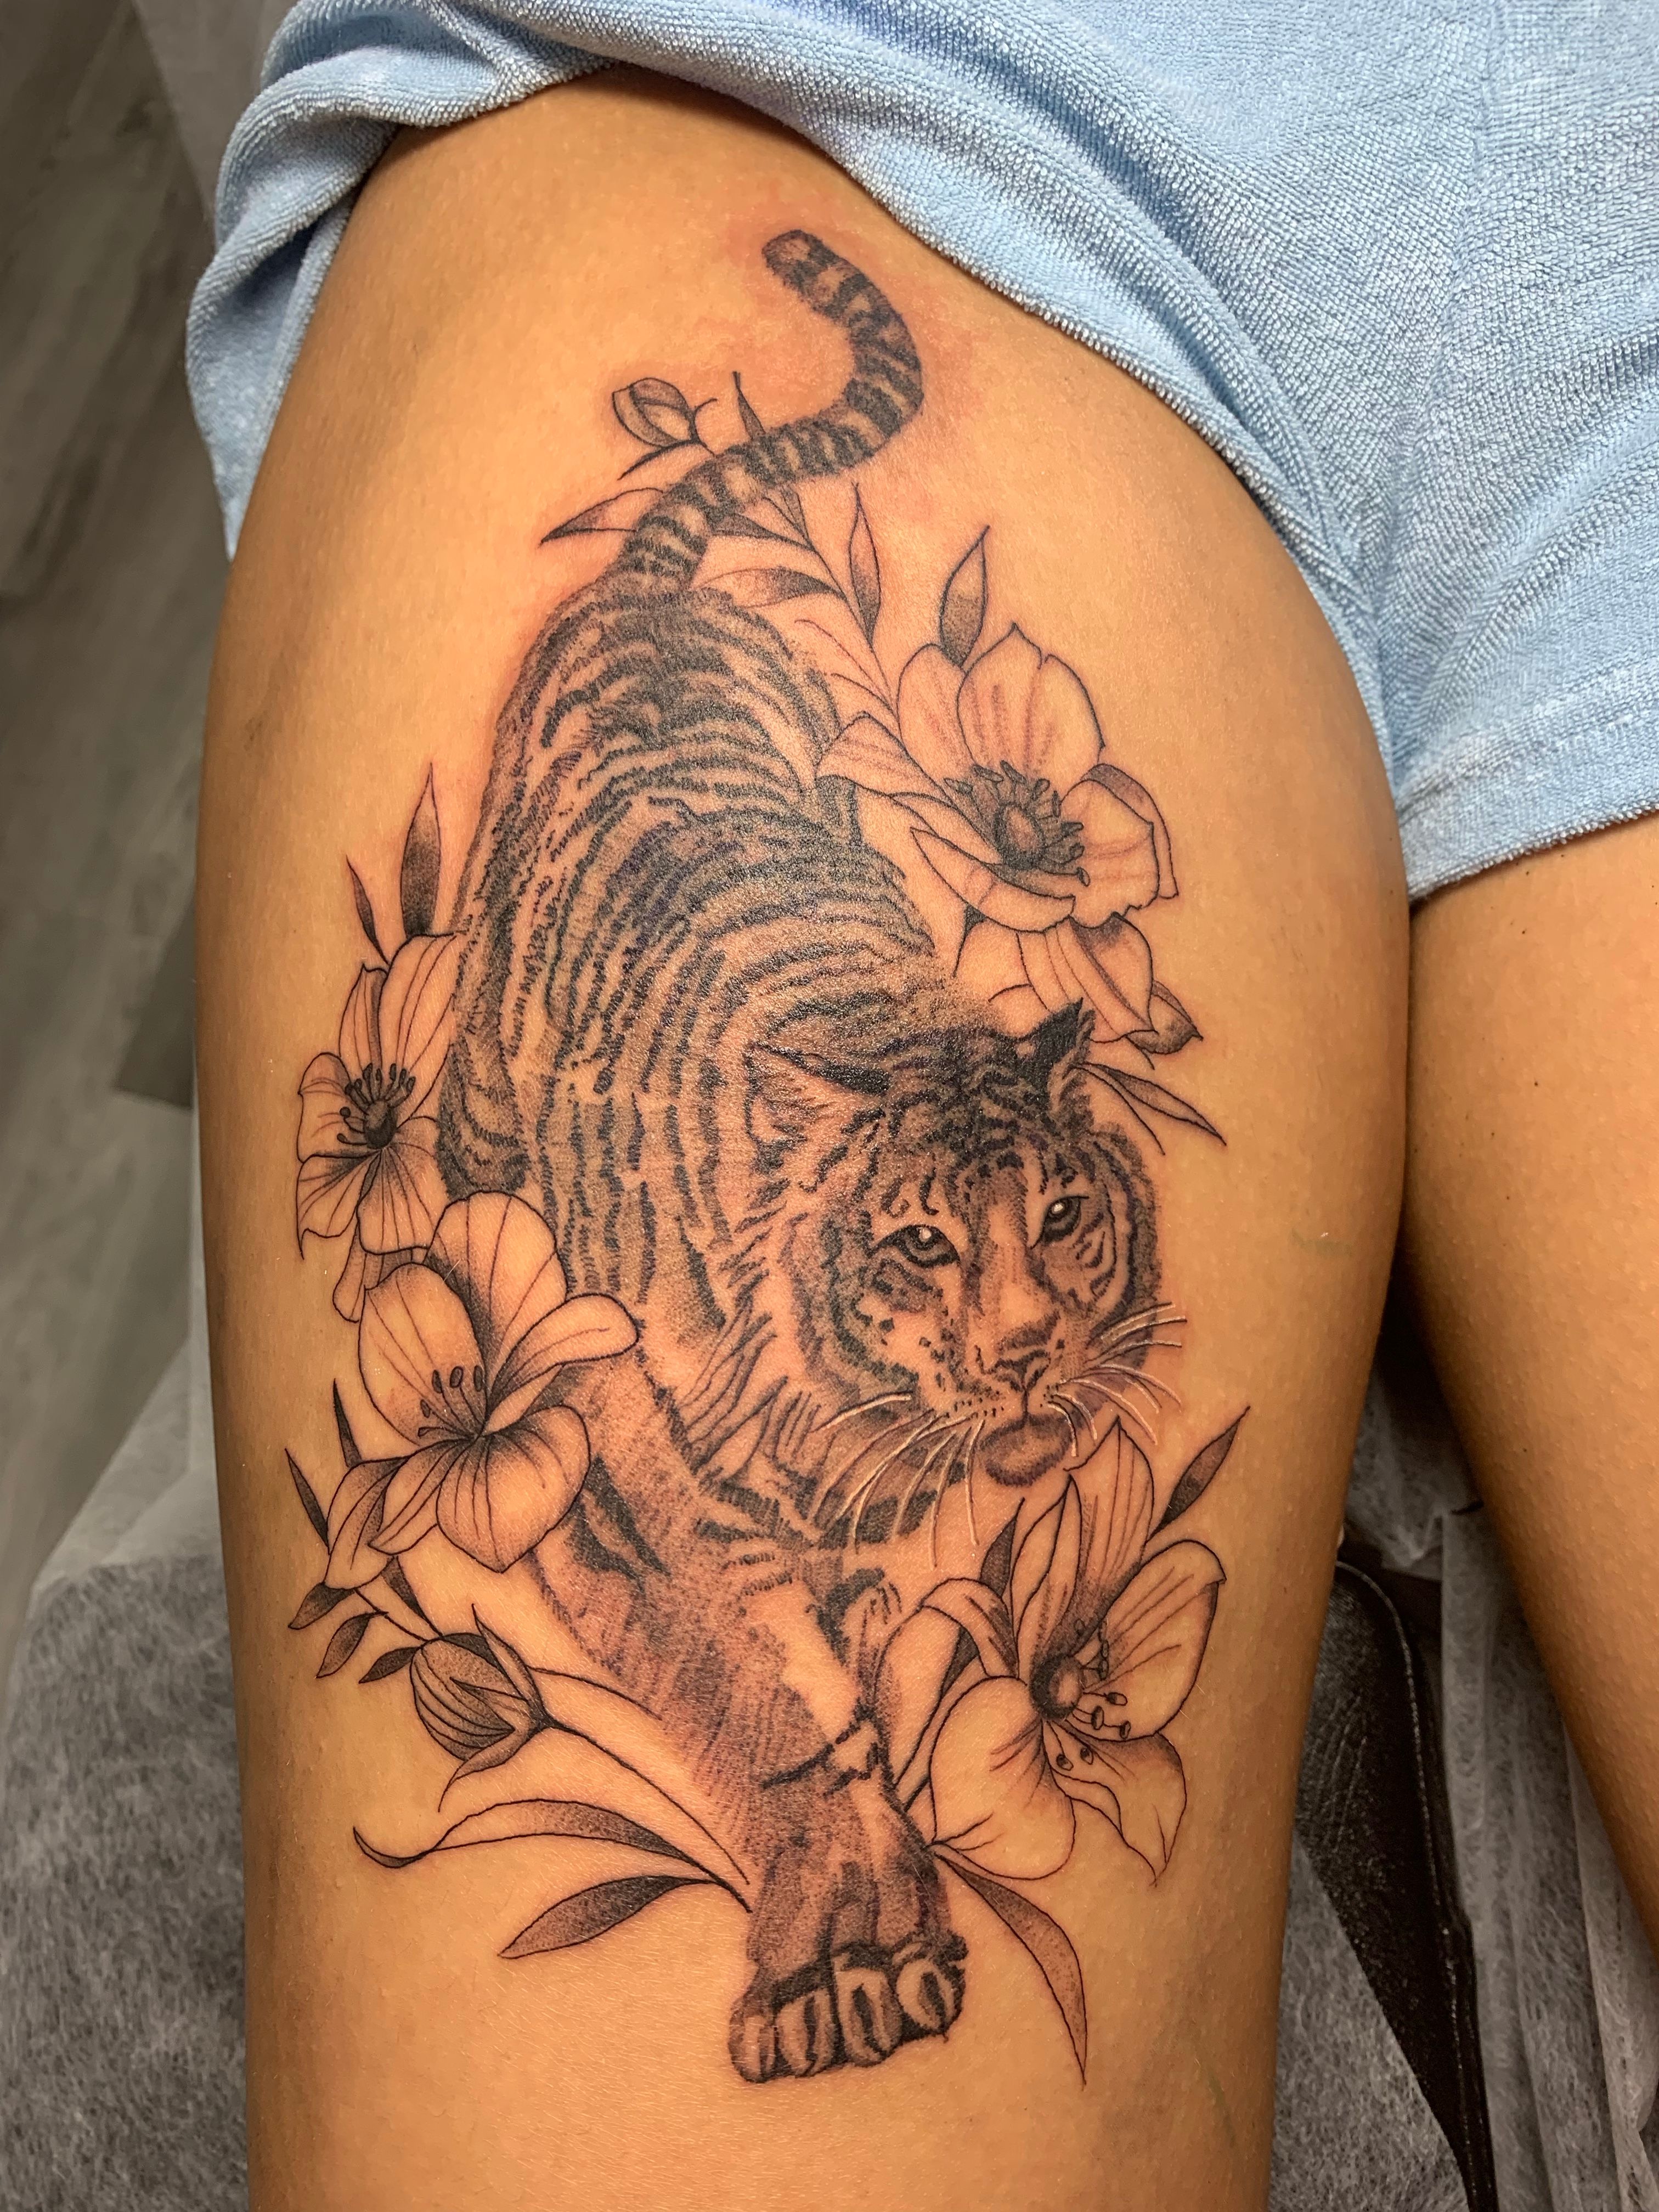 Skin Culture - Tiger and peony on the inner thigh #skinculturetattoo  #tattooroeselare #tattoo #tattoos #ink #stencilstuff #tigertattoo #tiger  #peonytattoo #peony | Facebook